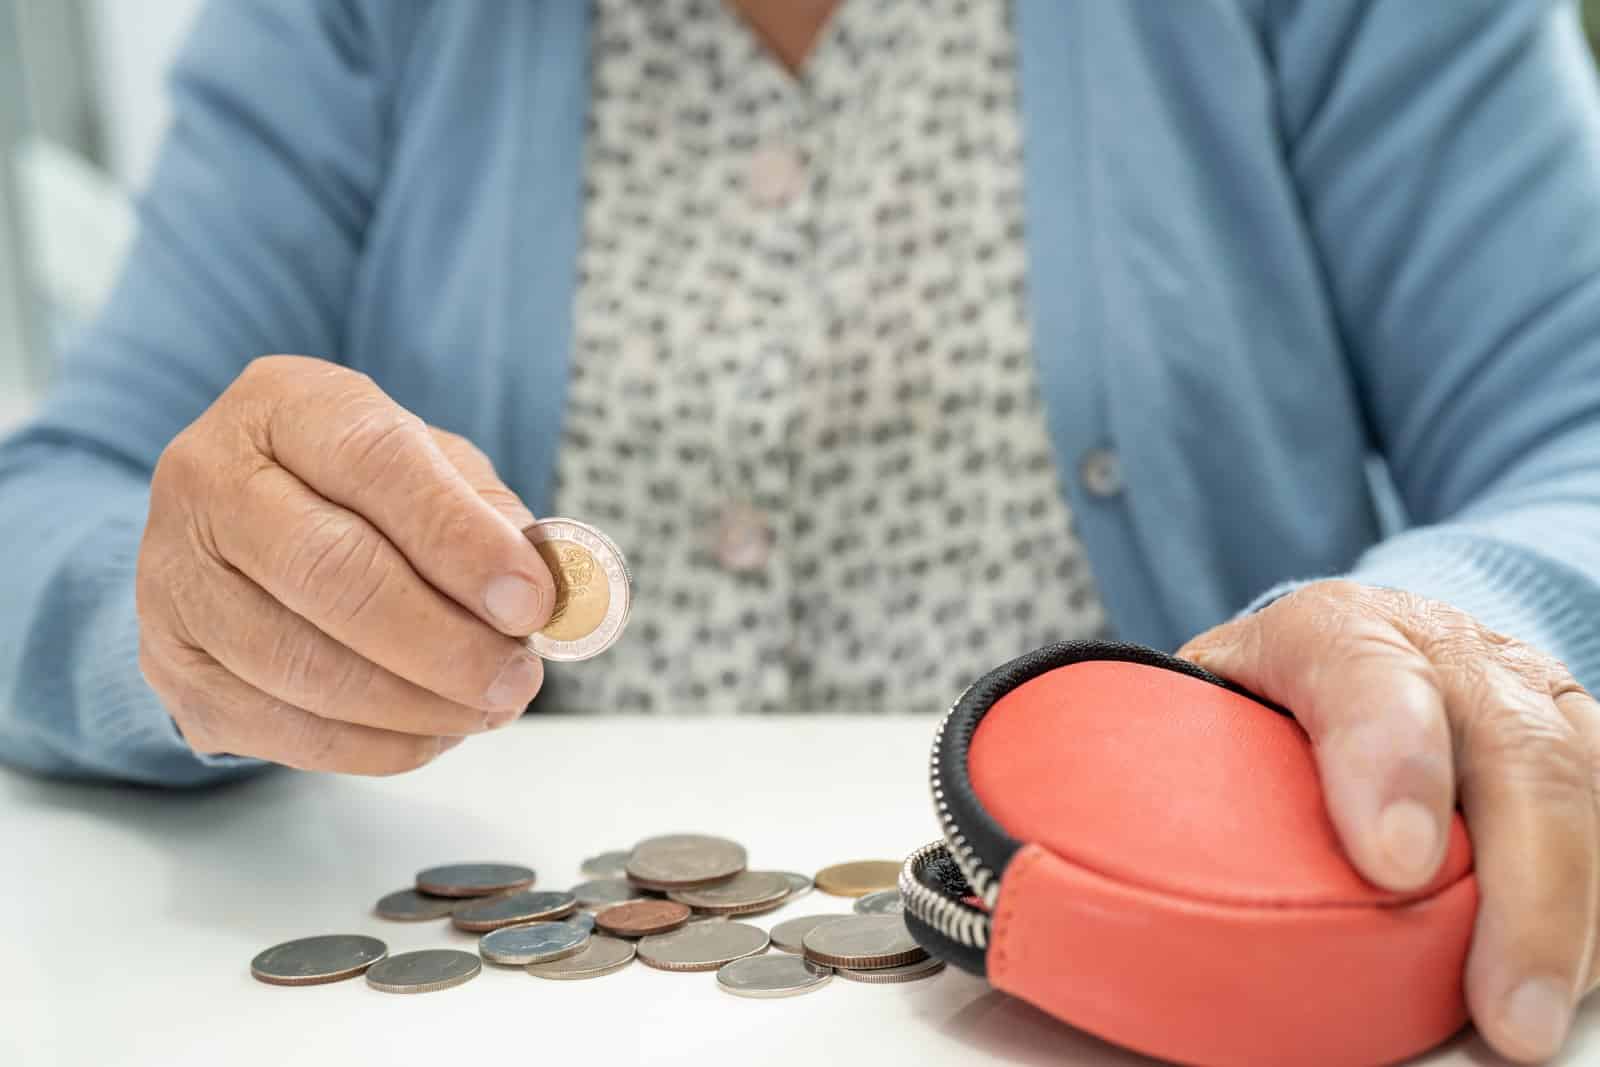 <p class="wp-caption-text">Image Credit: Shutterstock / sasirin pamai</p>  <p>For those with private pensions pegged to earlier retirement ages, this hike could mean renegotiating terms or facing penalties for early withdrawal, complicating your financial strategy.</p>